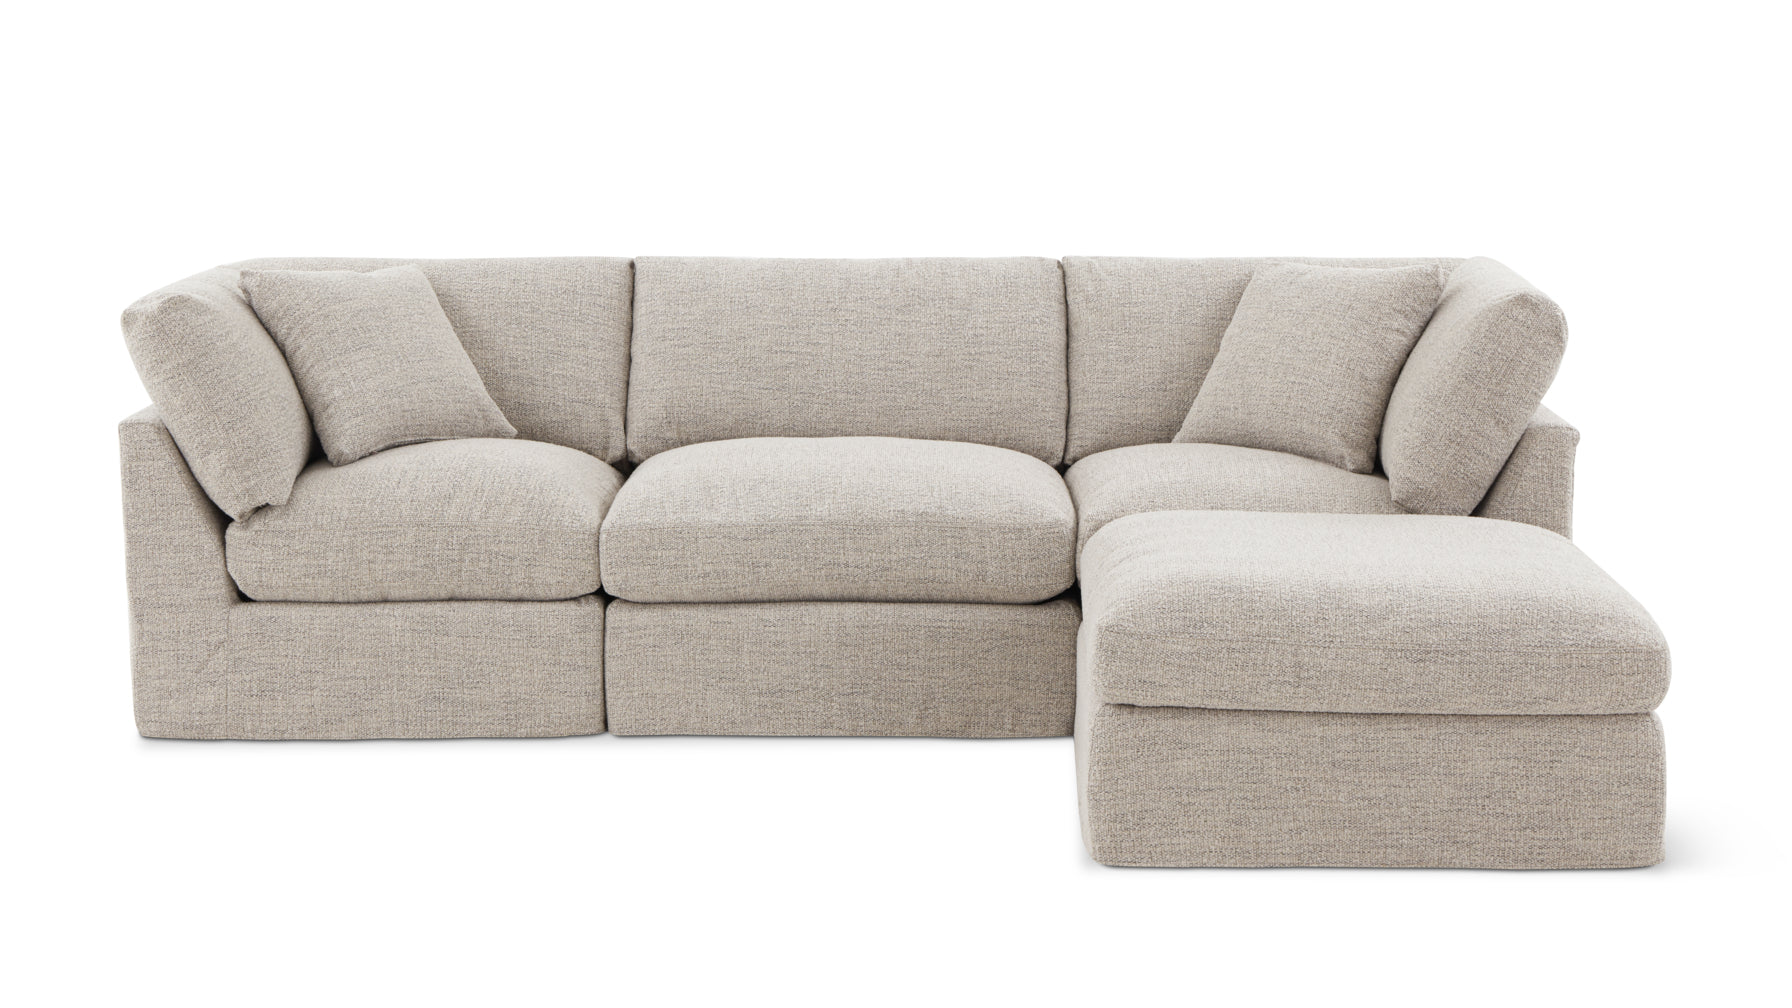 Get Together™ 4-Piece Modular Sectional, Standard, Oatmeal - Image 1